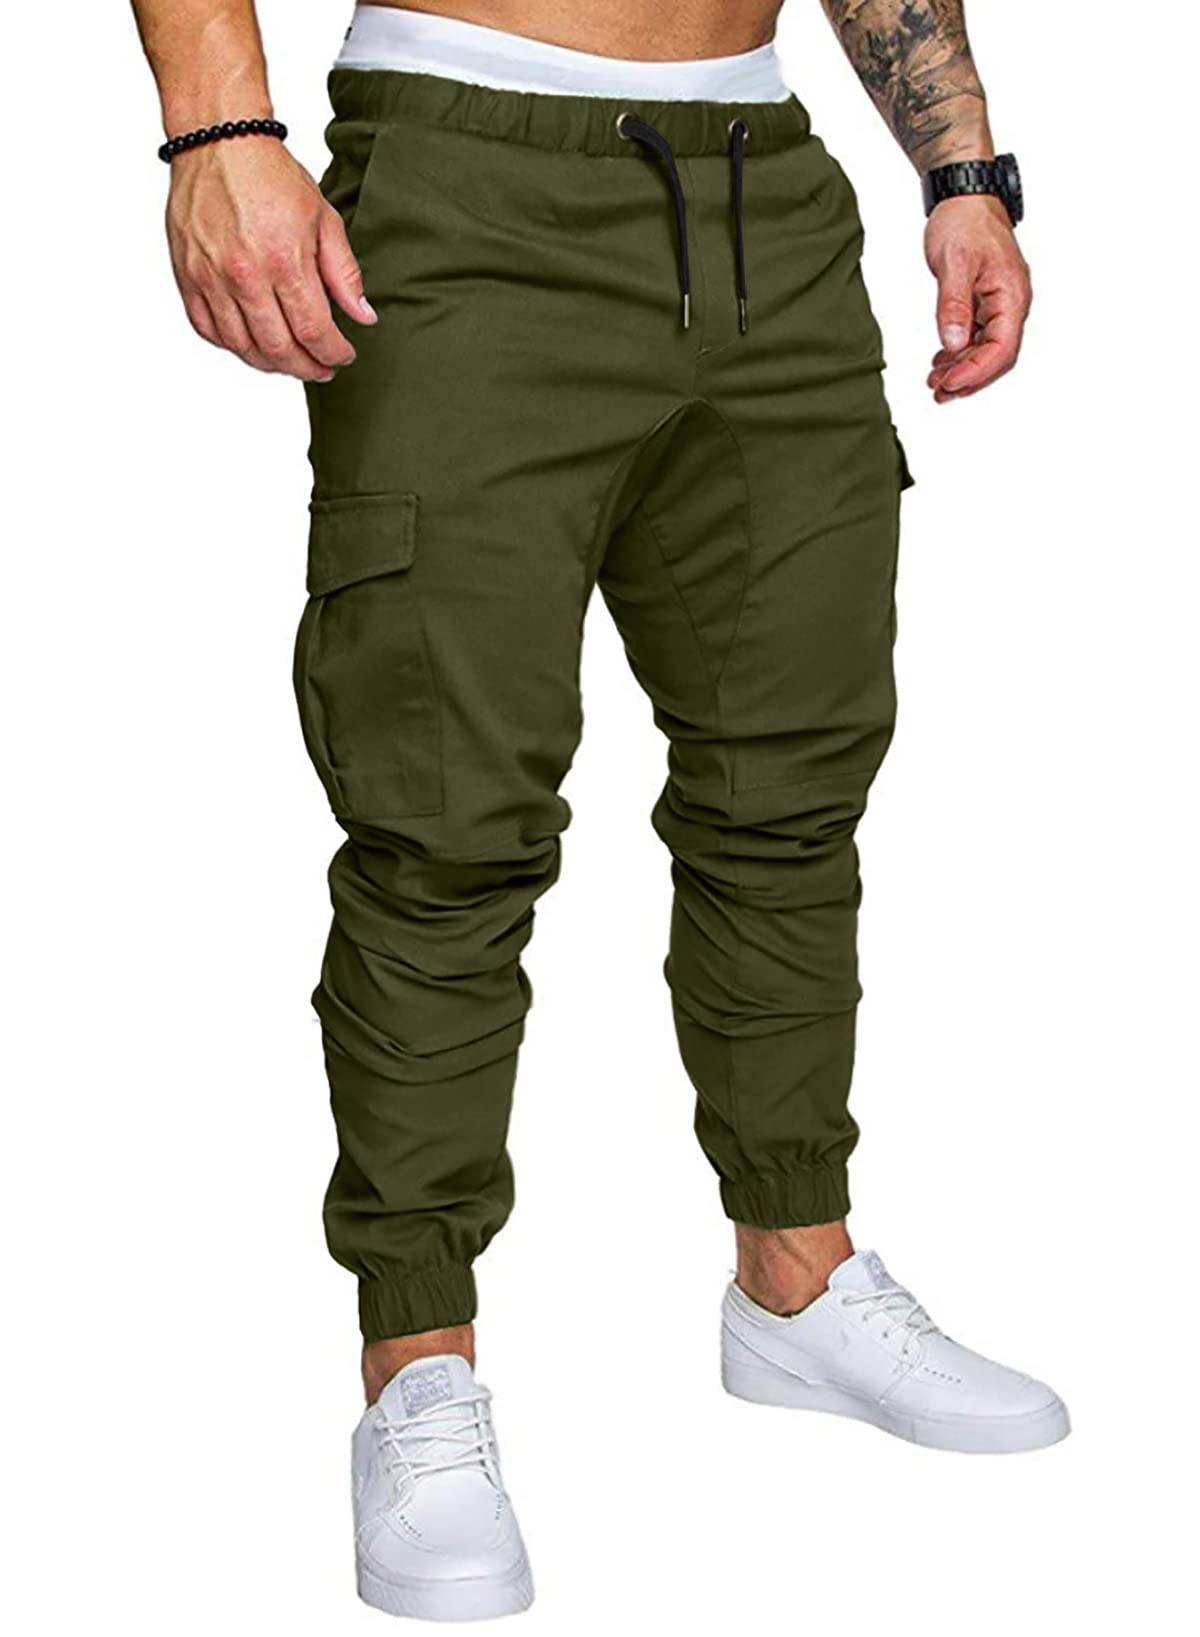 Casual Chic Outfit: Green Joggers